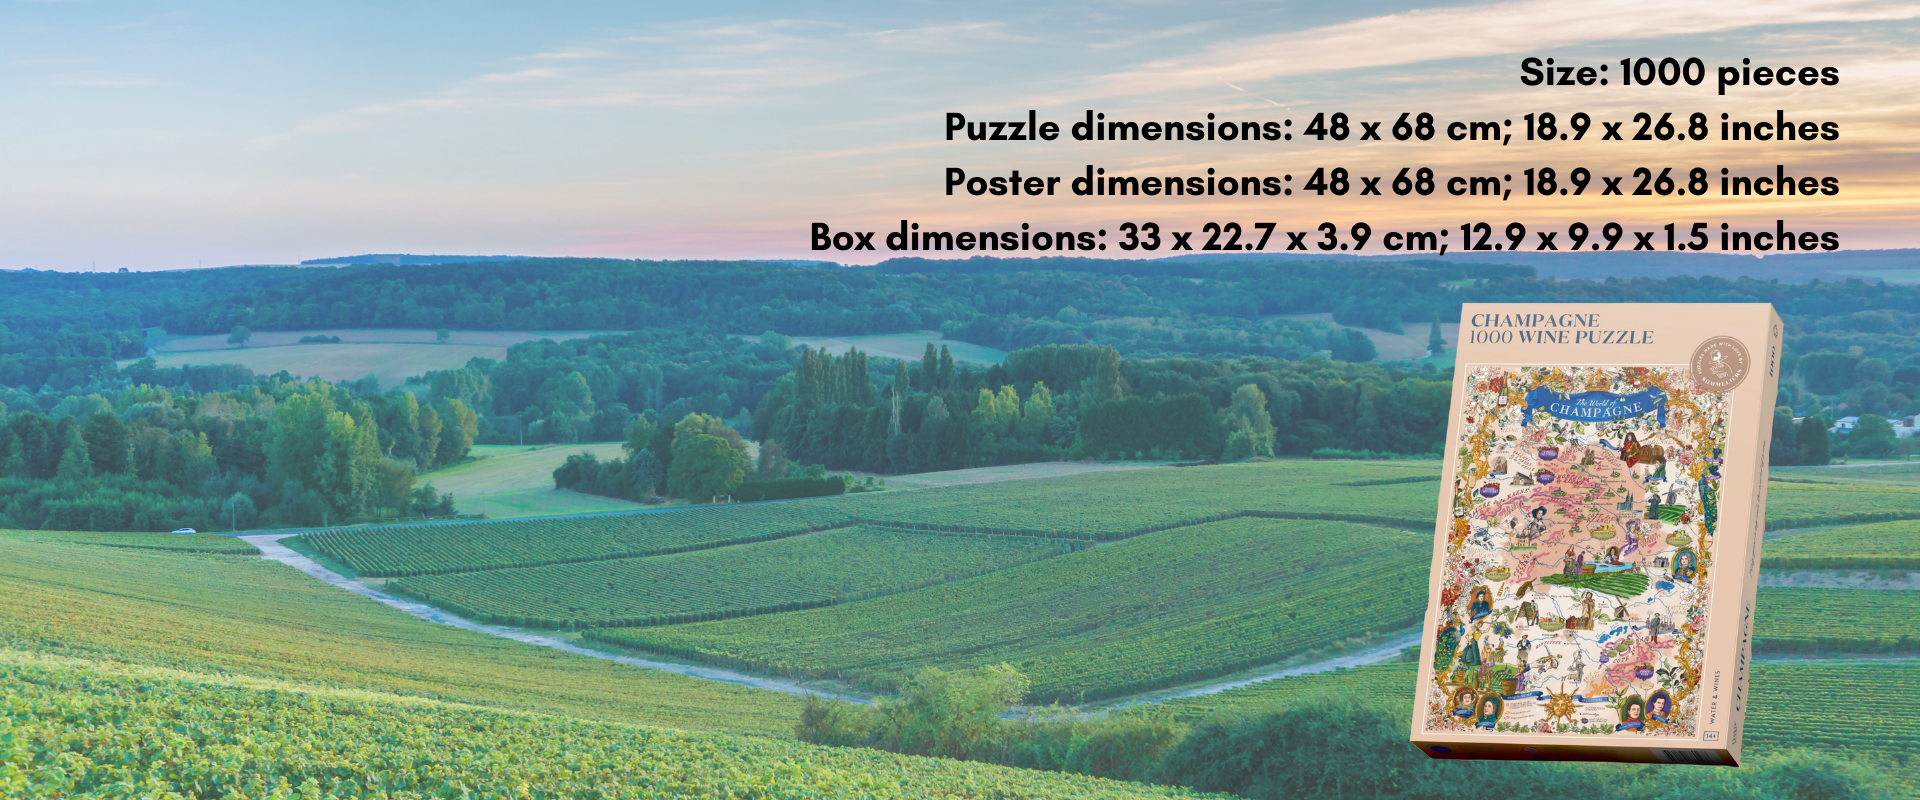 Champagne box puzzle dimensions. Background is Reims, a city in champagne